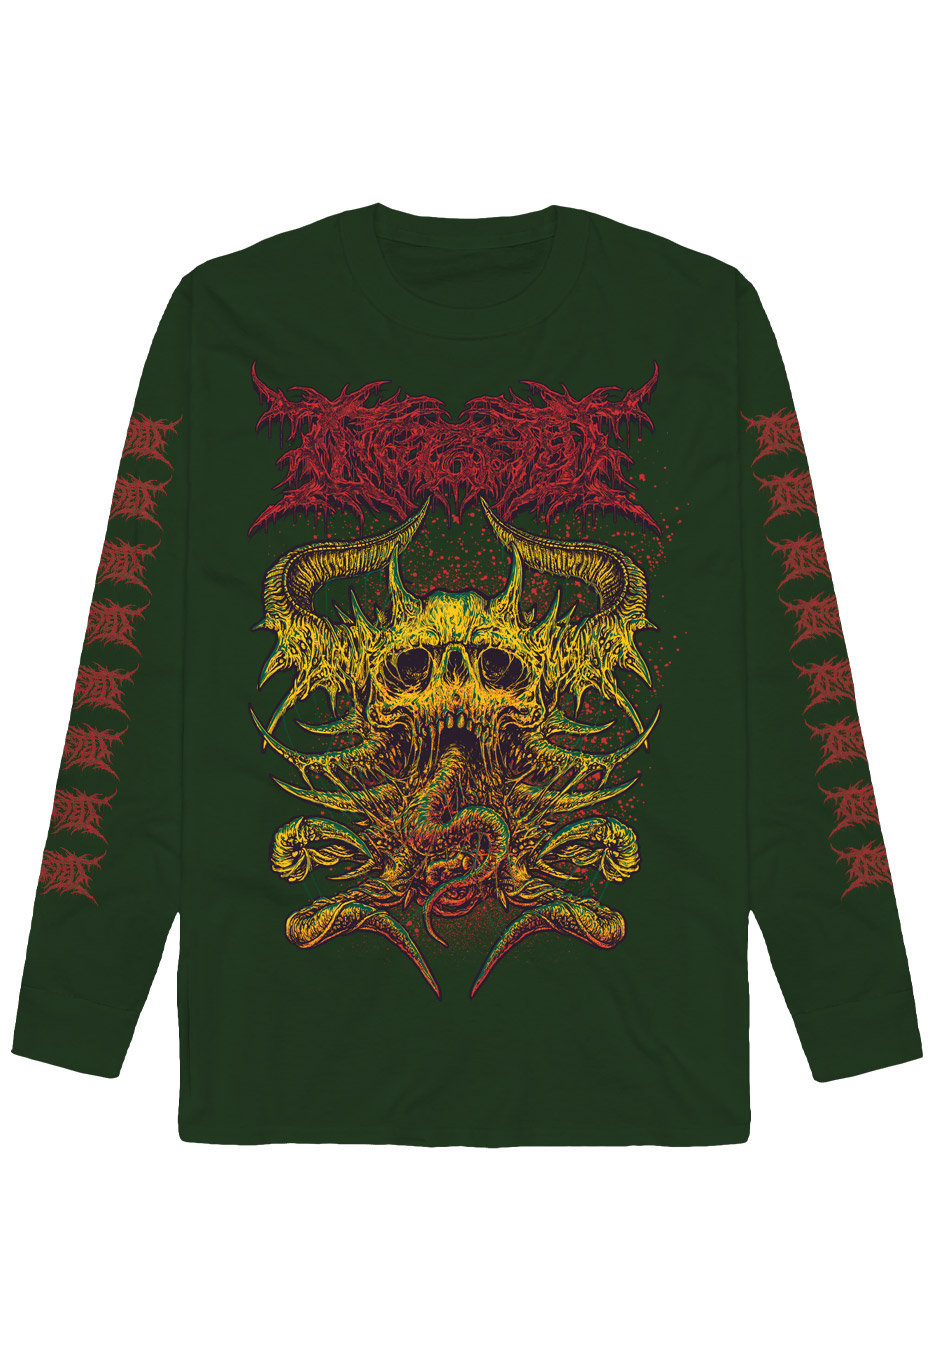 Ingested - Contagion Forest Green - Longsleeve